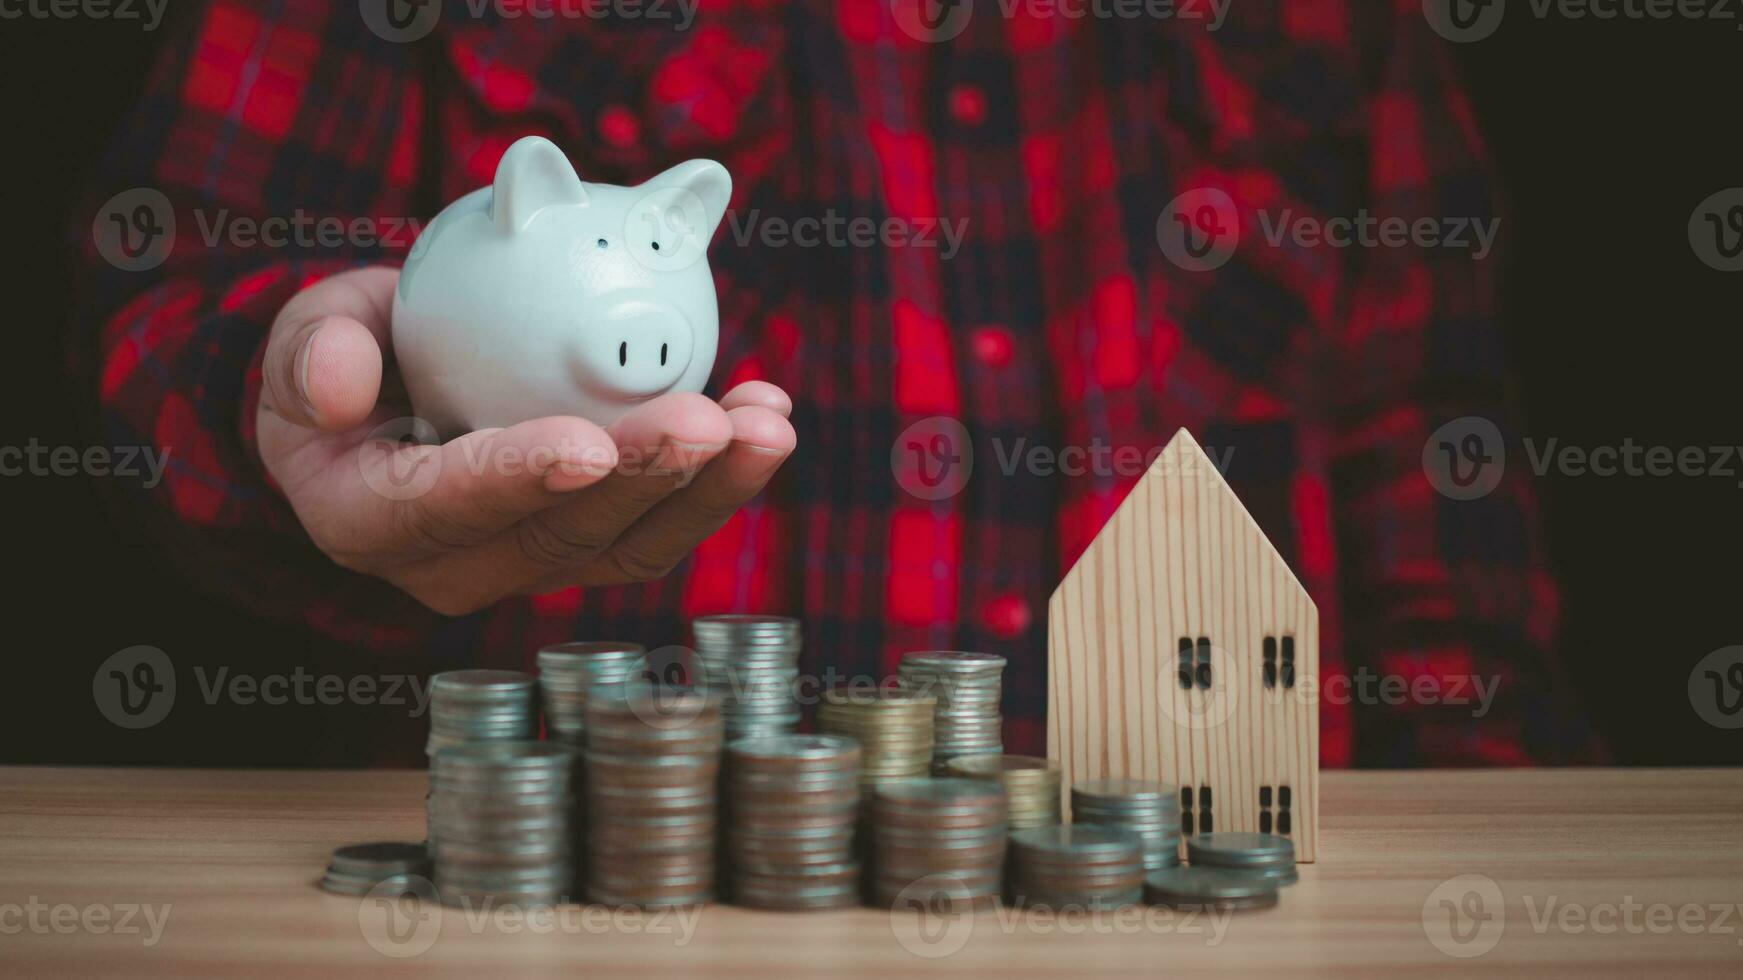 Human holds a piggy bank and there are coins and model wooden houses lined up on the wooden floor. Concepts of finance, savings, investment, and setting goals for fixed deposits with banks. photo